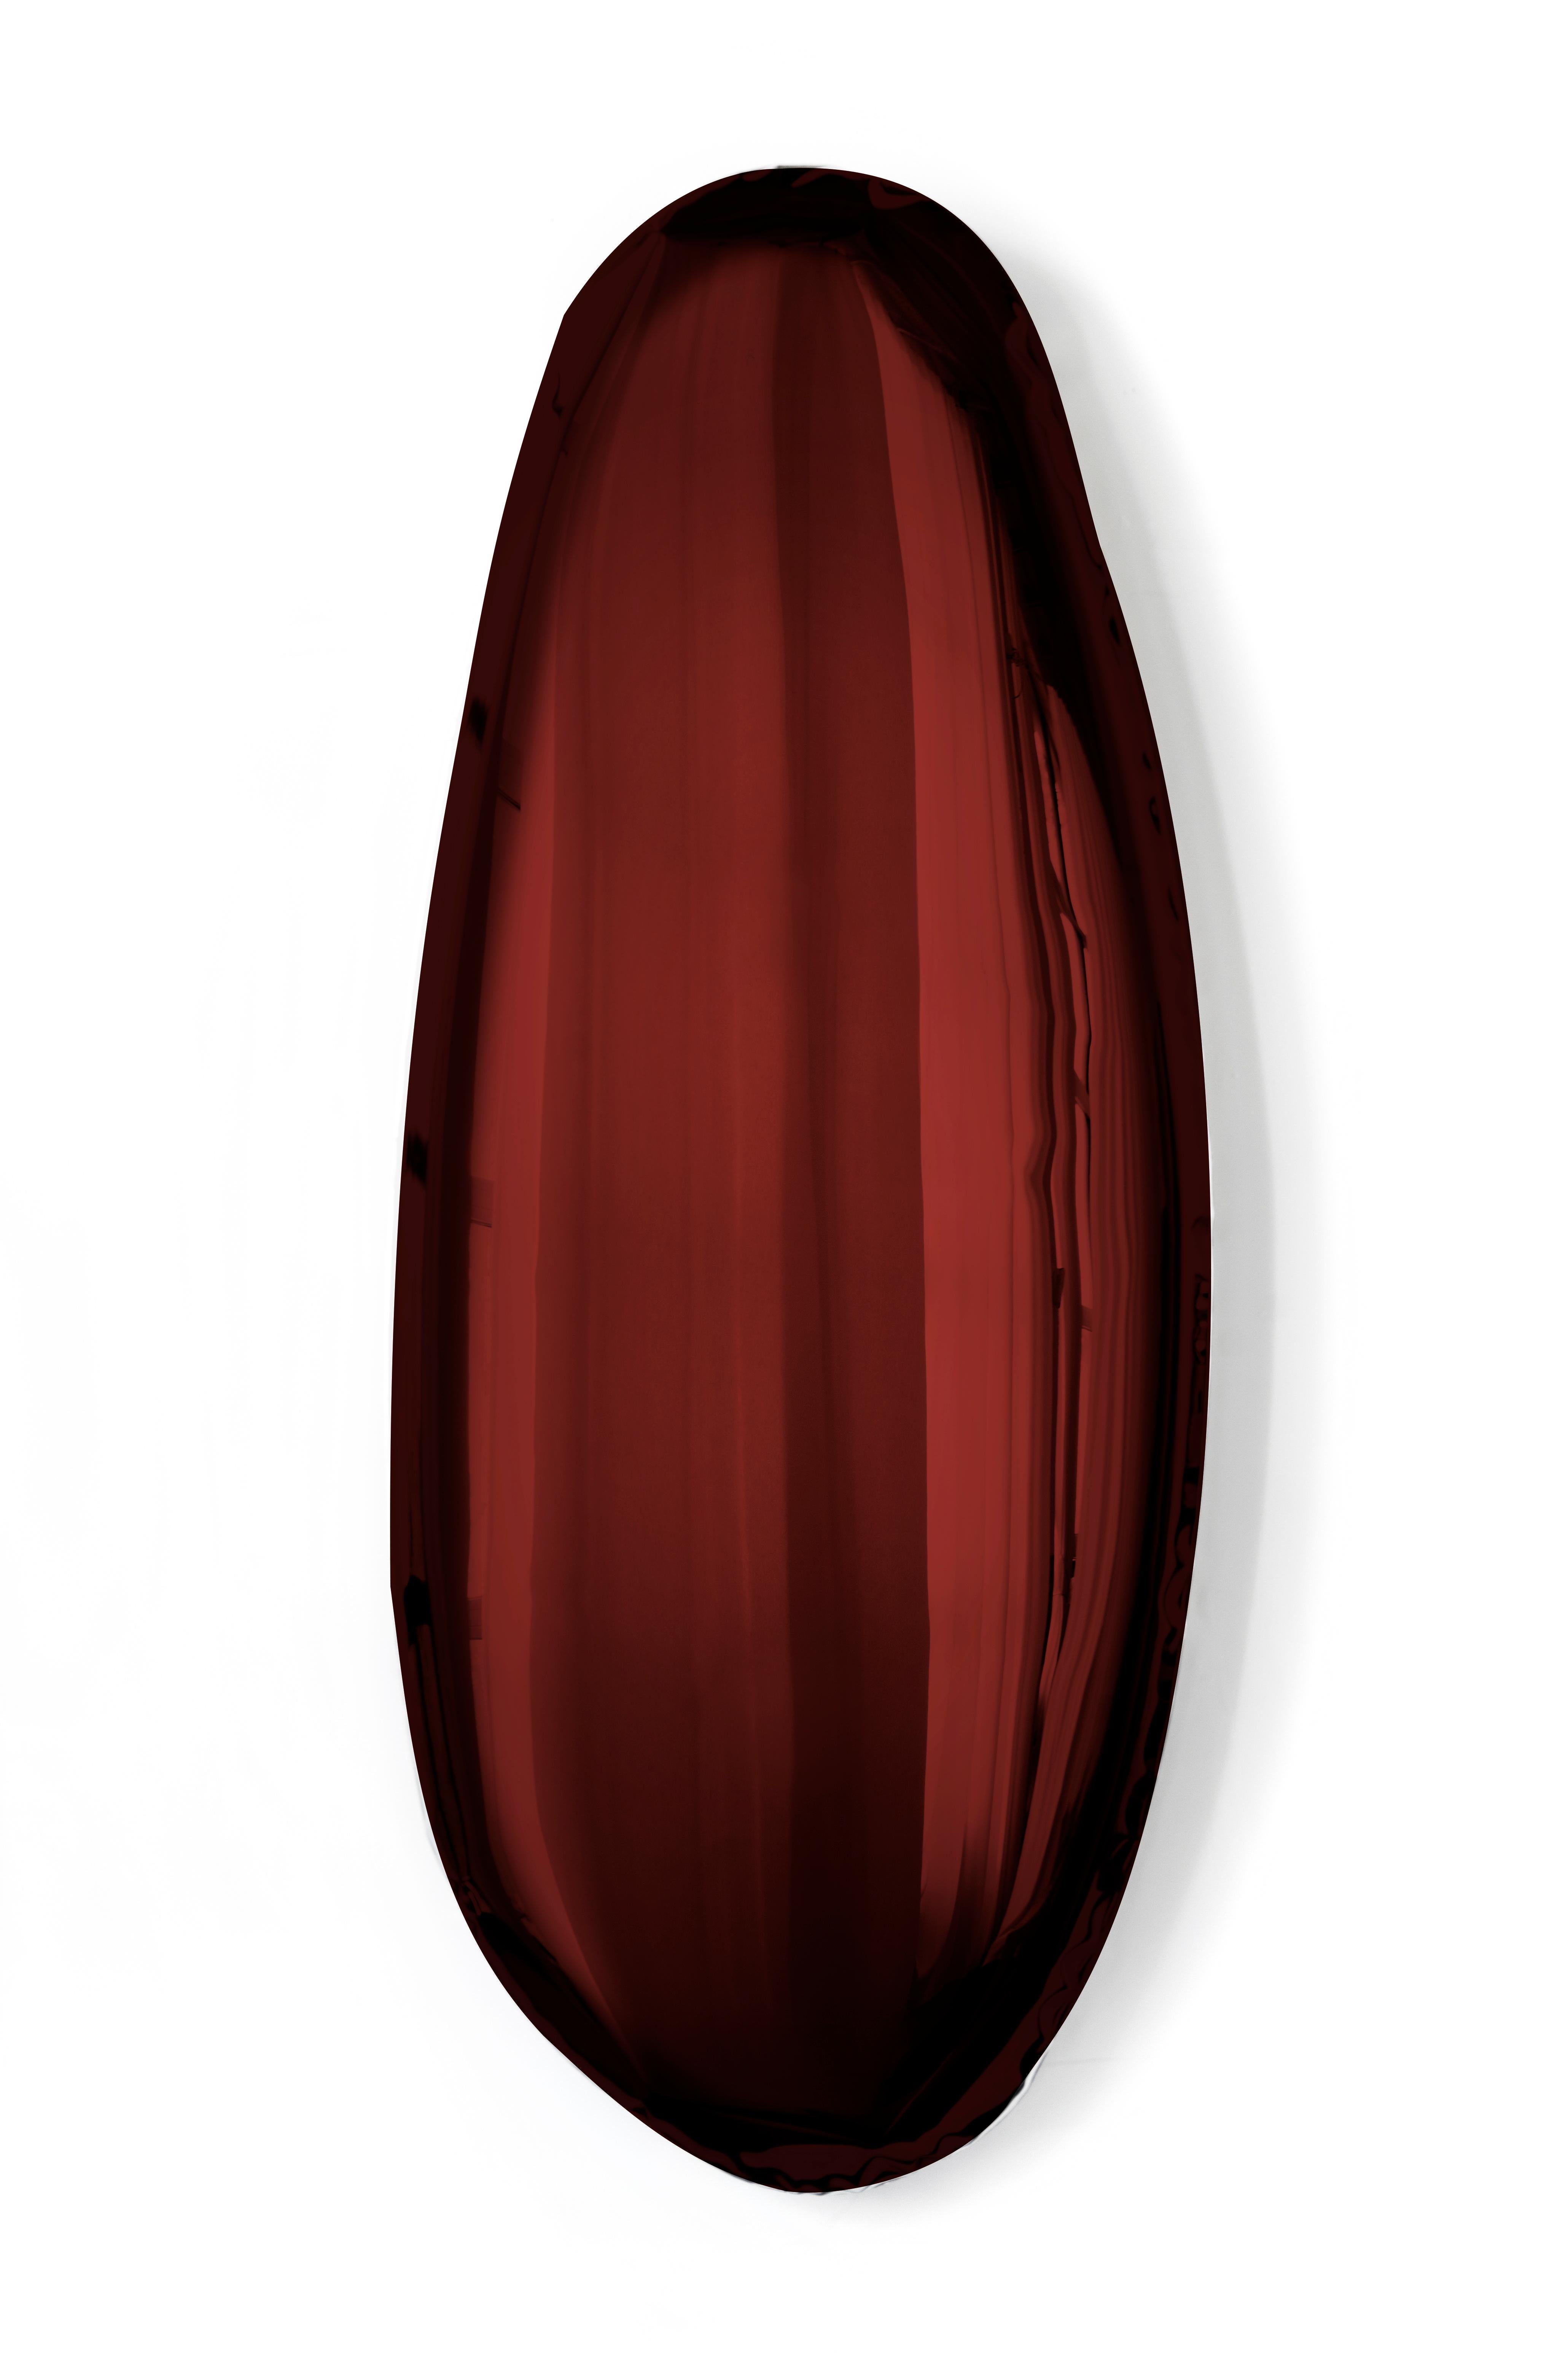 Mirror Tafla O5 Rubin Red, in Polished Stainless Steel by Zieta In New Condition For Sale In Paris, FR